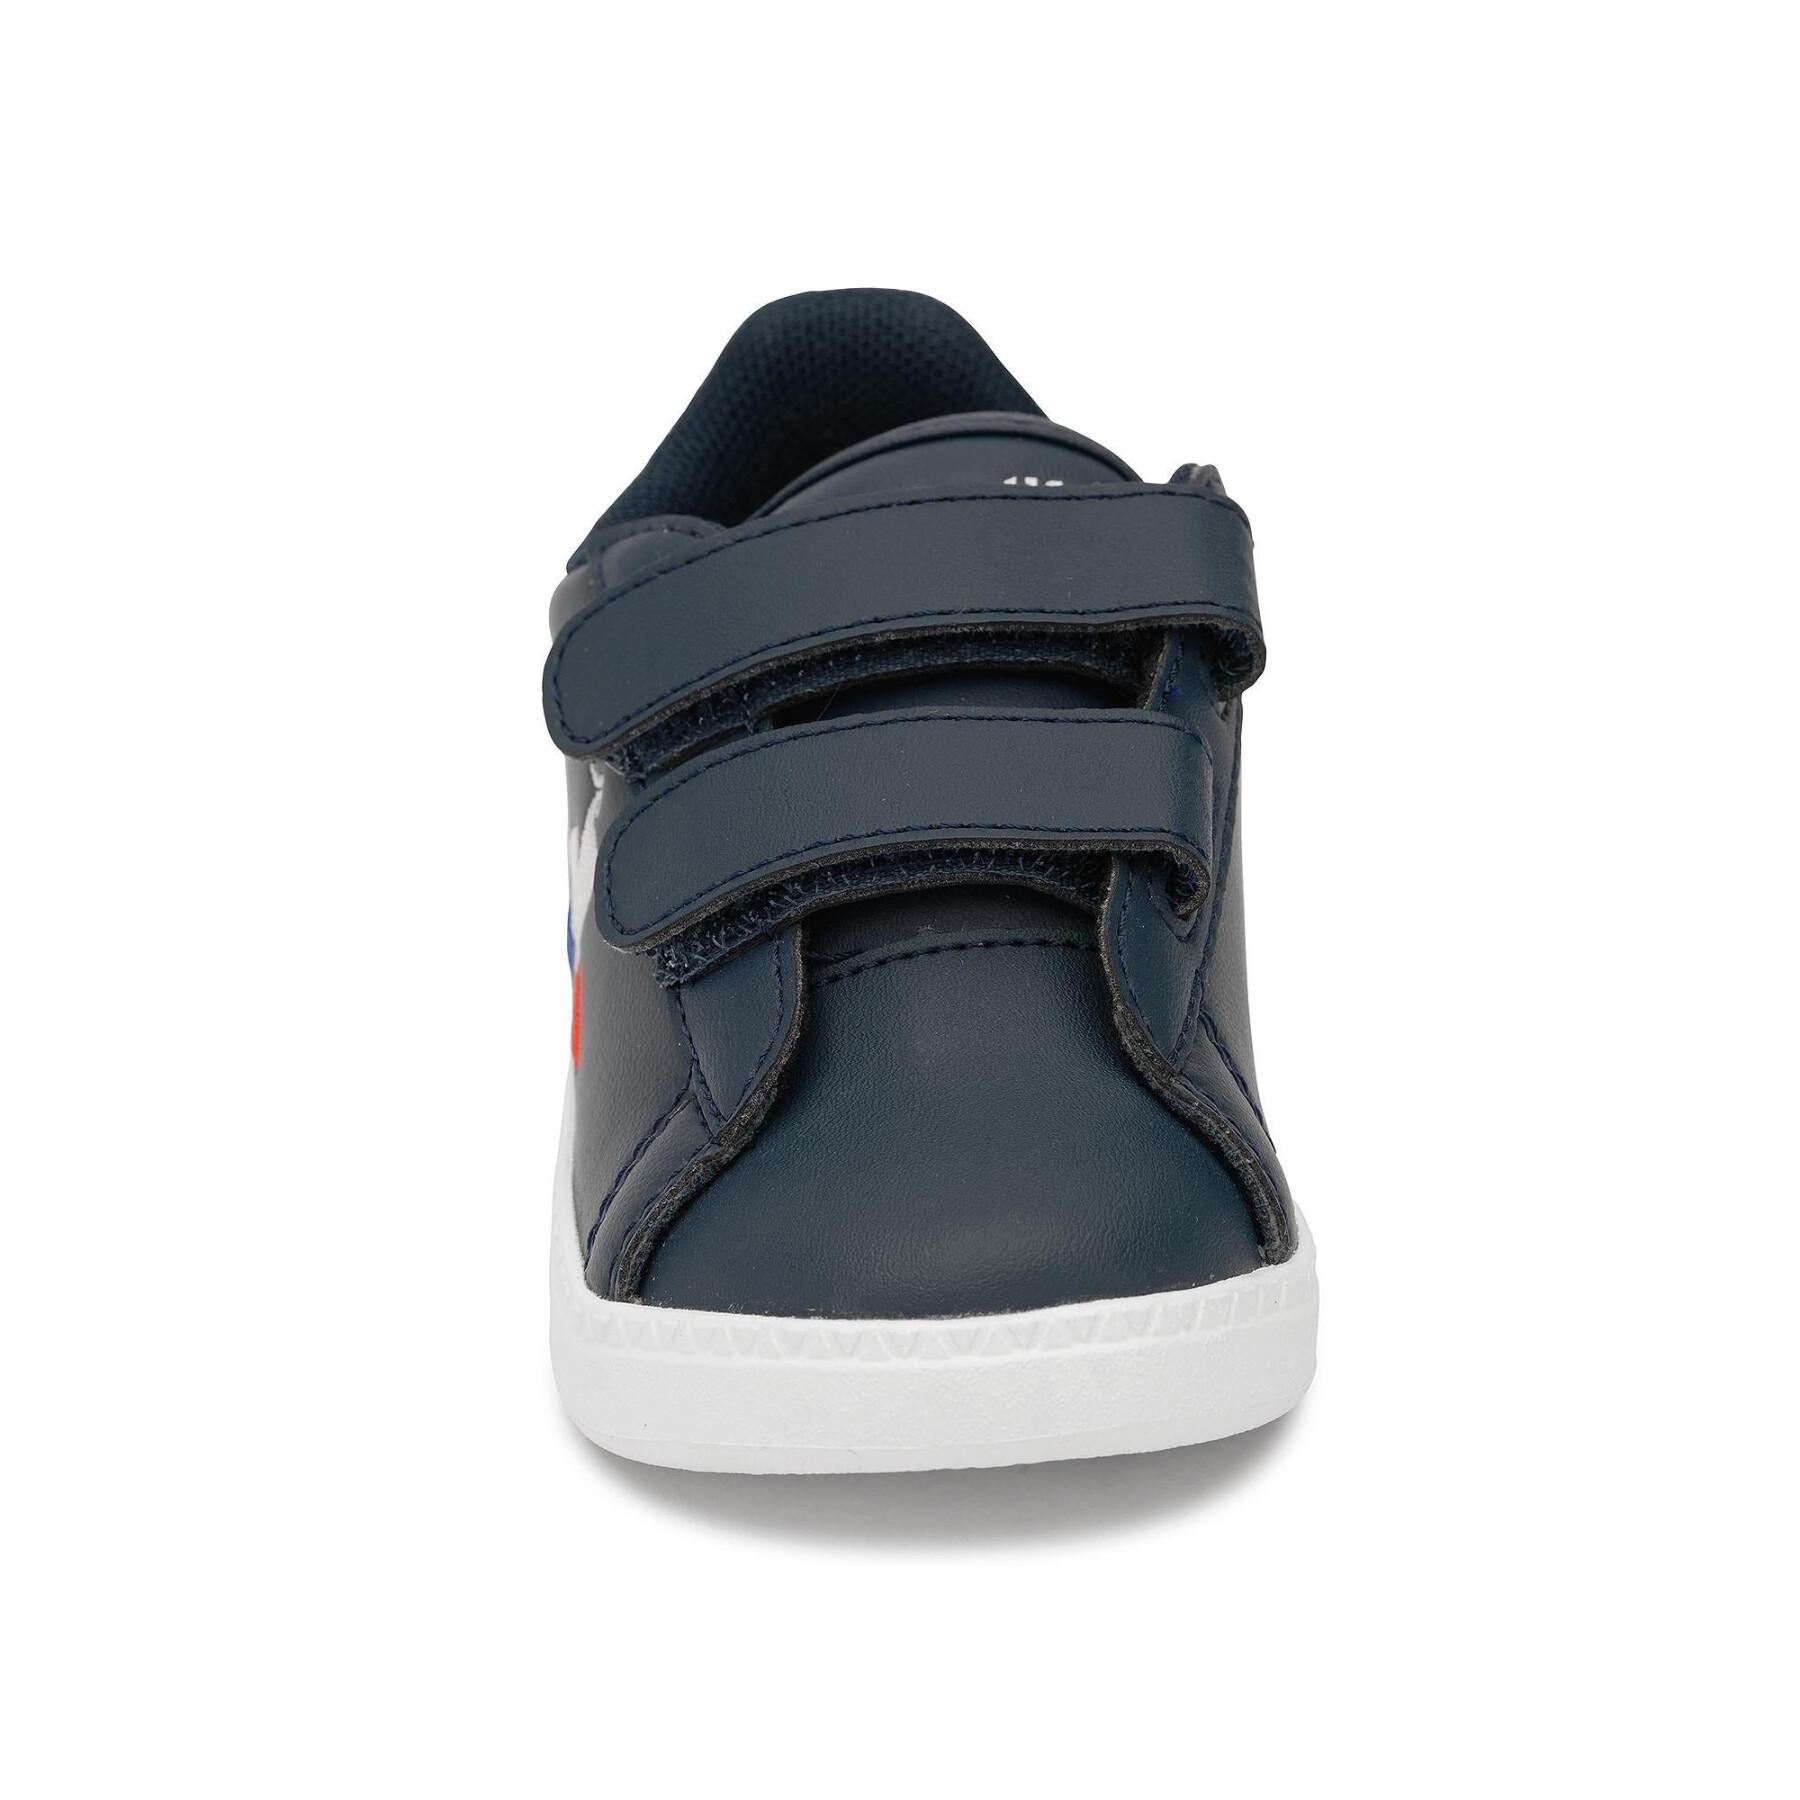 Children's sneakers Le Coq Sportif Courtset Inf